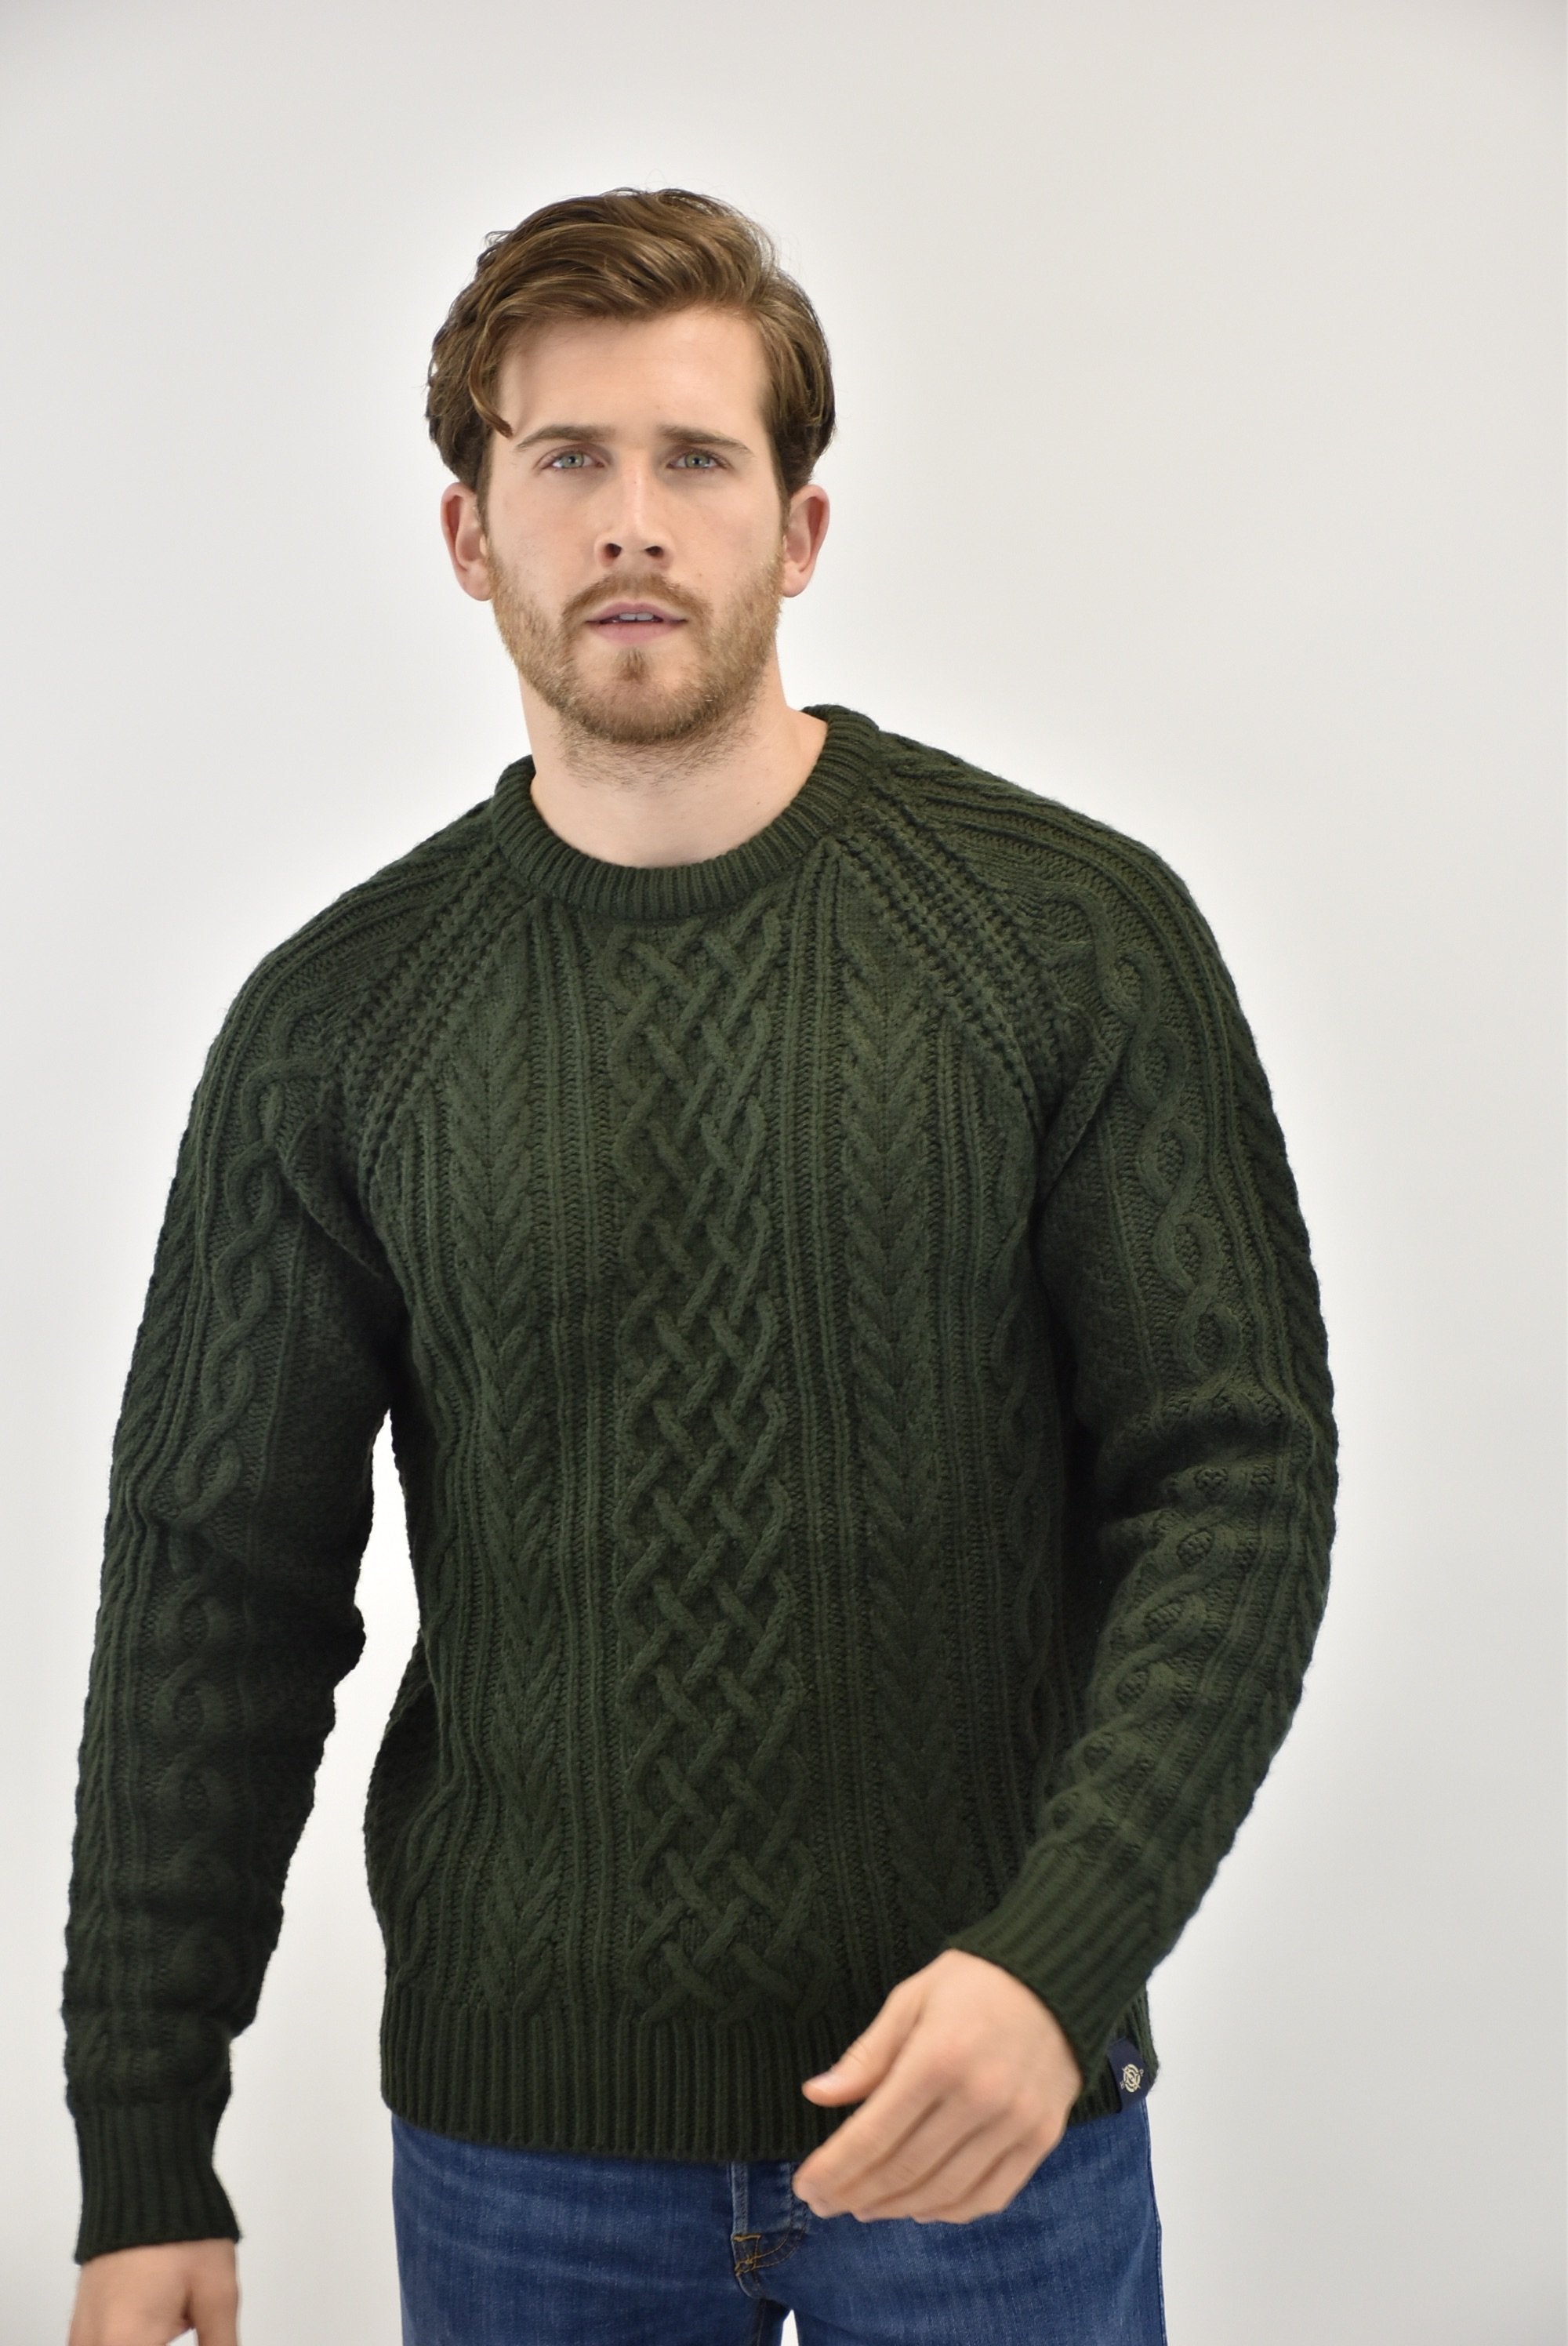 Humble Pioneer - Timeless Mens Dark Olive Fisherman Cable Knit Jumper